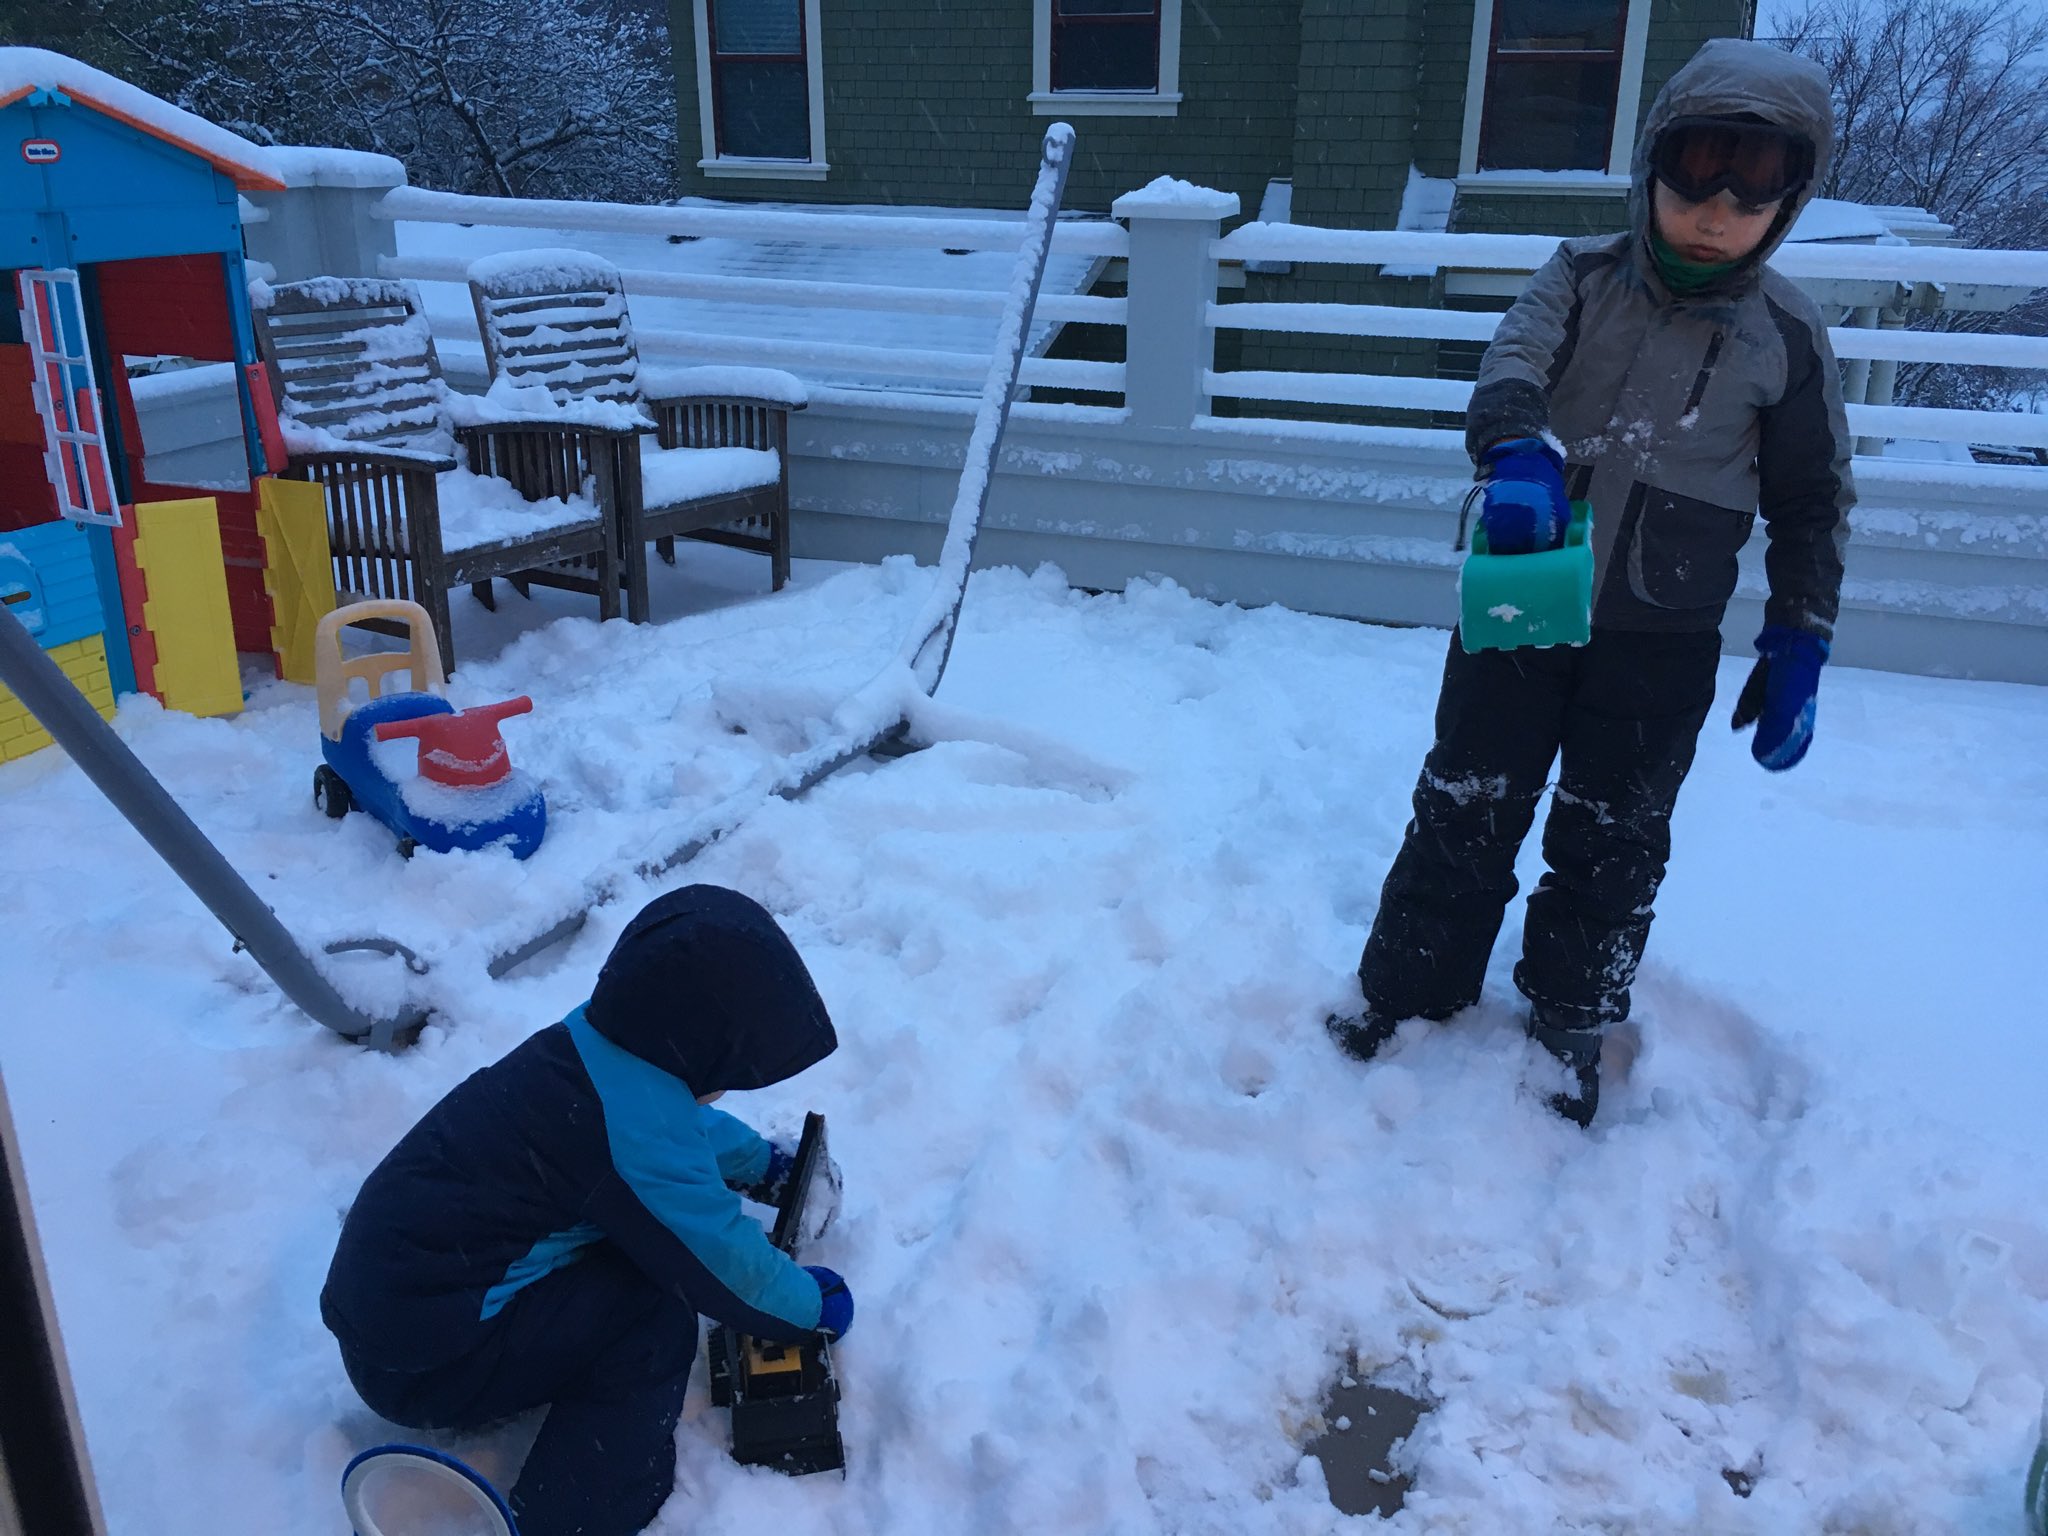 Two kids, bundled up in snow clothes, playing with snow on the deck.